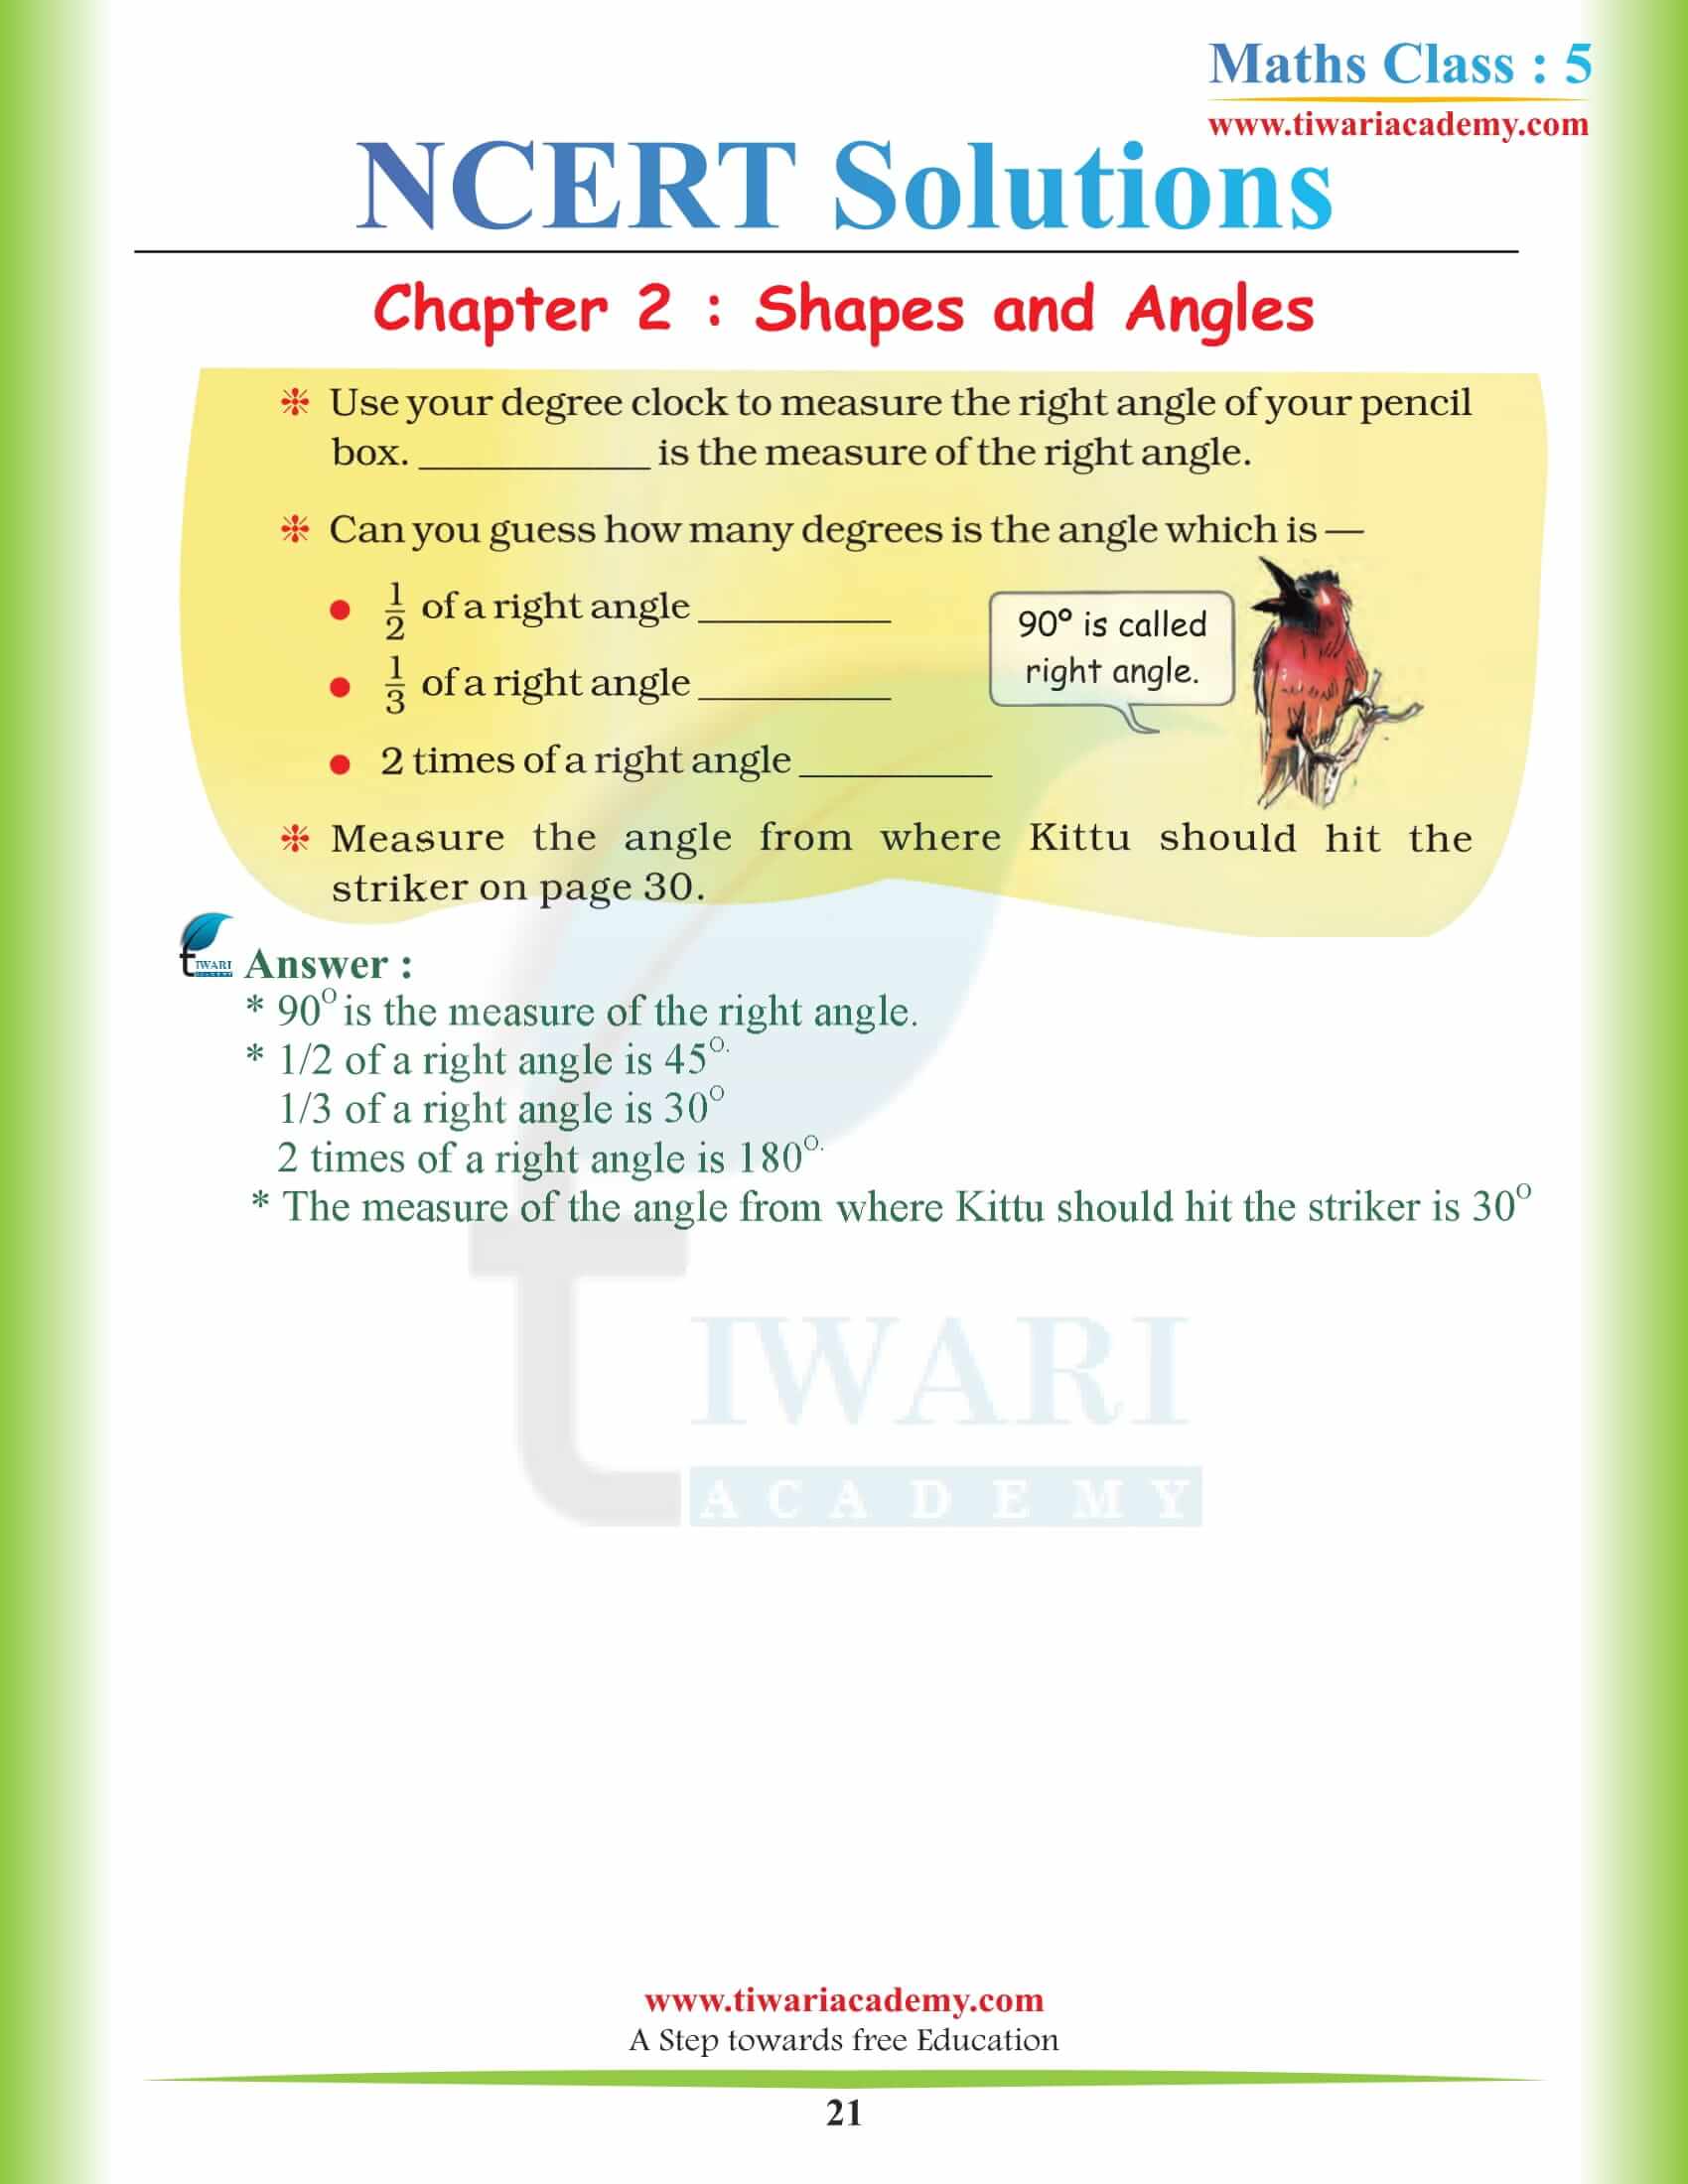 Class 5 Maths Magic Chapter 2 sols in English